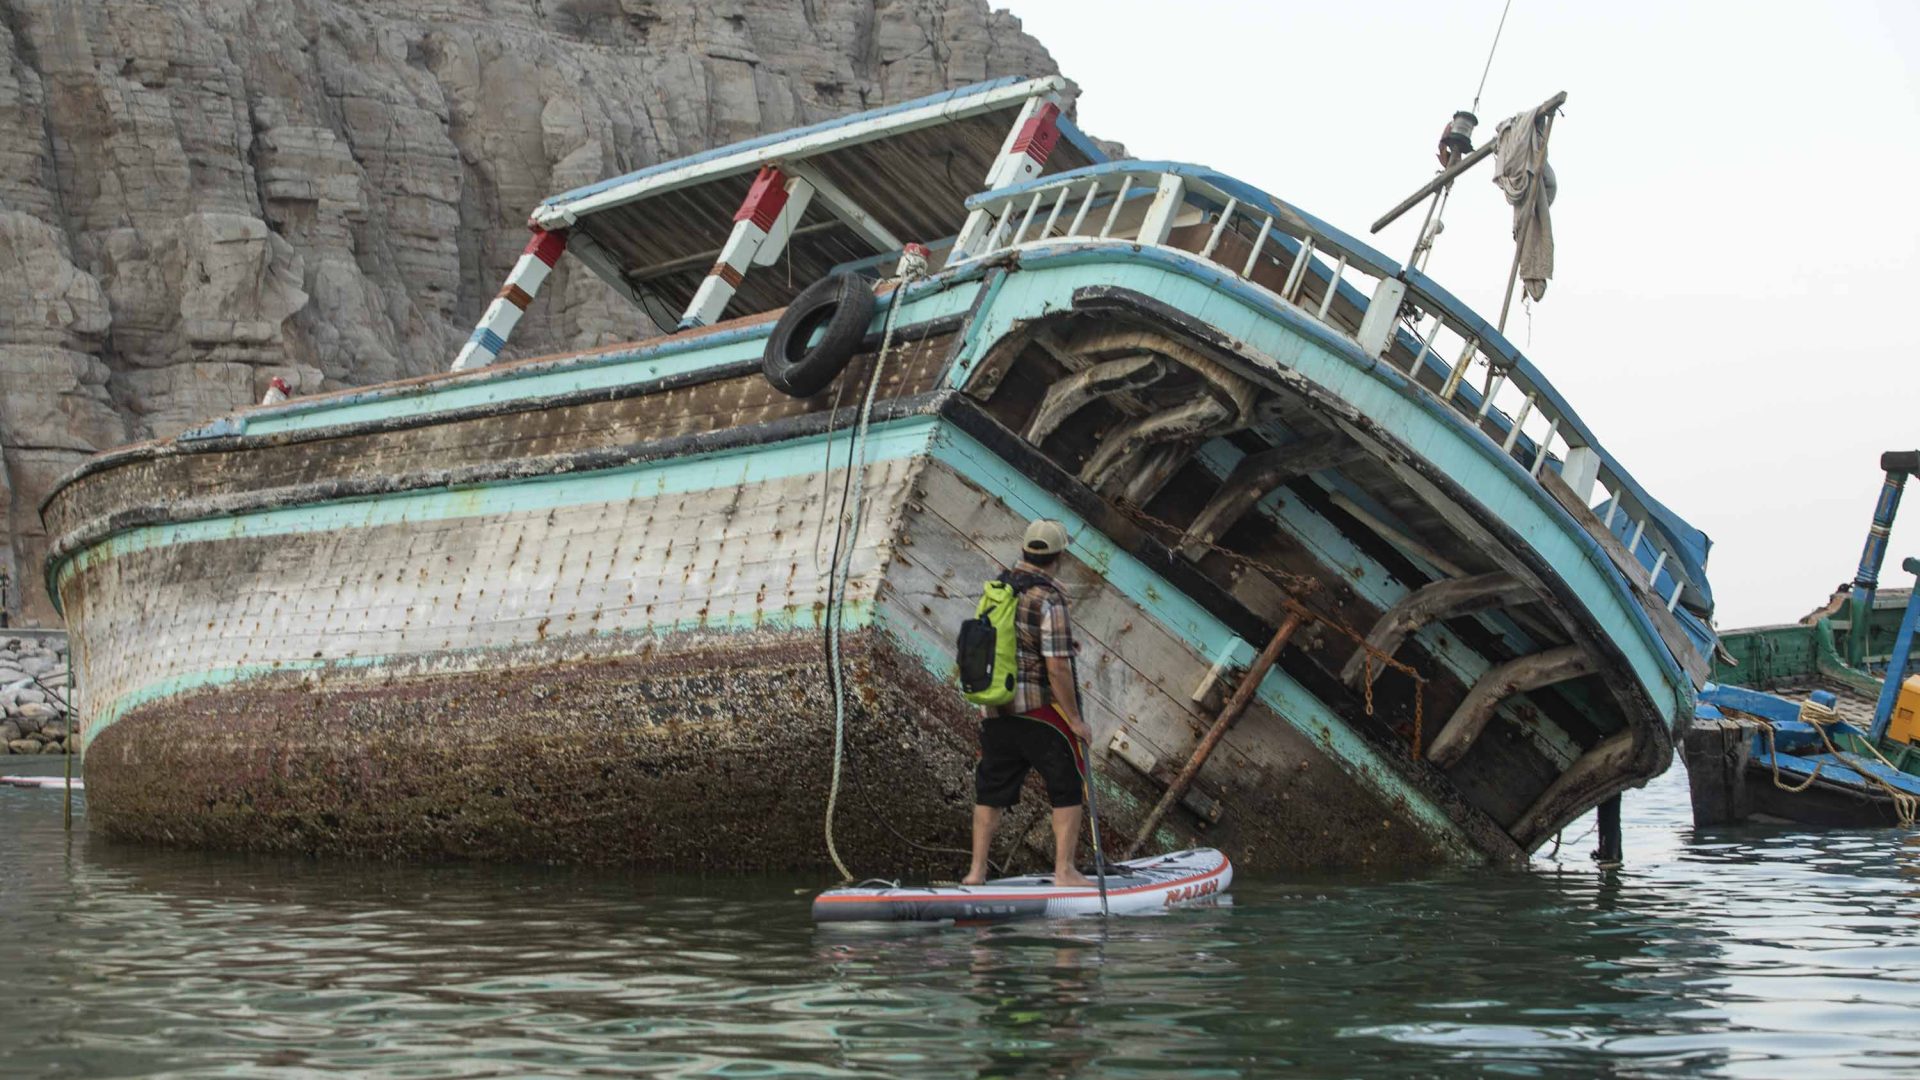 A paddle boarder looks at the wreck of a boat.